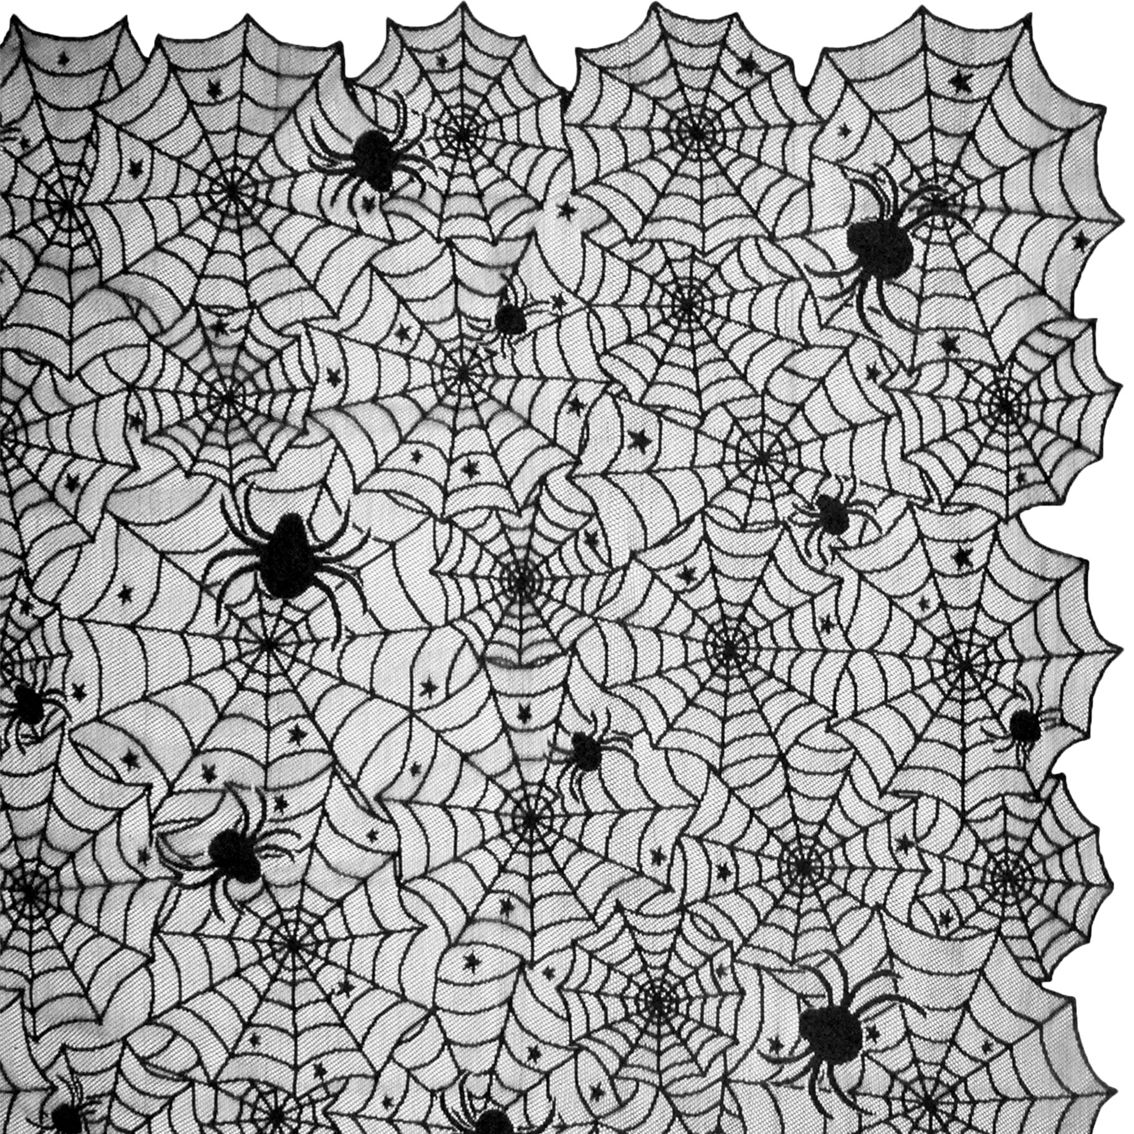 Design Imports 54 in. x 72 in. Halloween Lace Tablecloth - Image 2 of 9